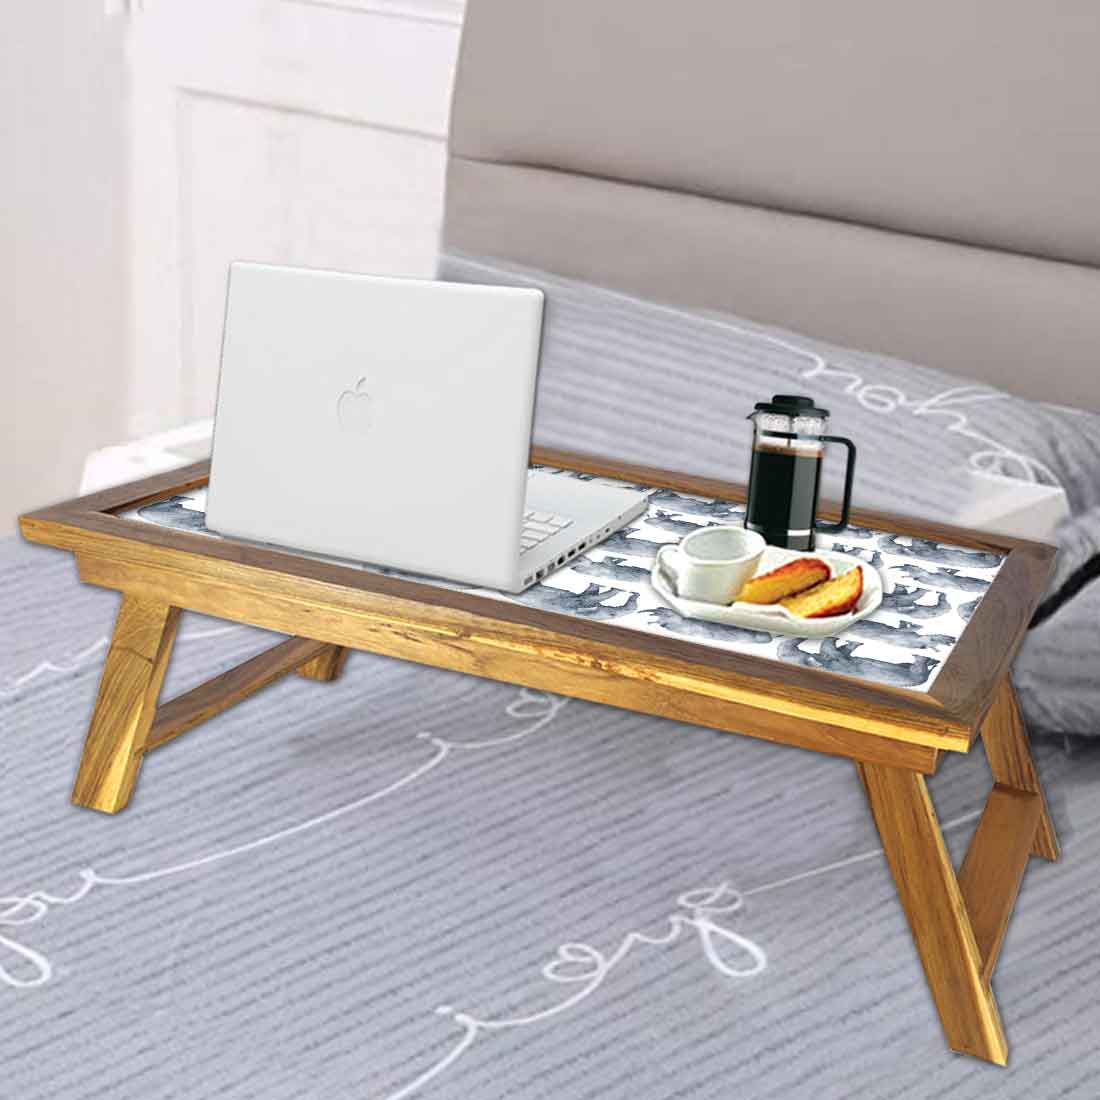 Foldable Reading Tables for Home Bed Breakfast Table Study Desk - Elephants Nutcase